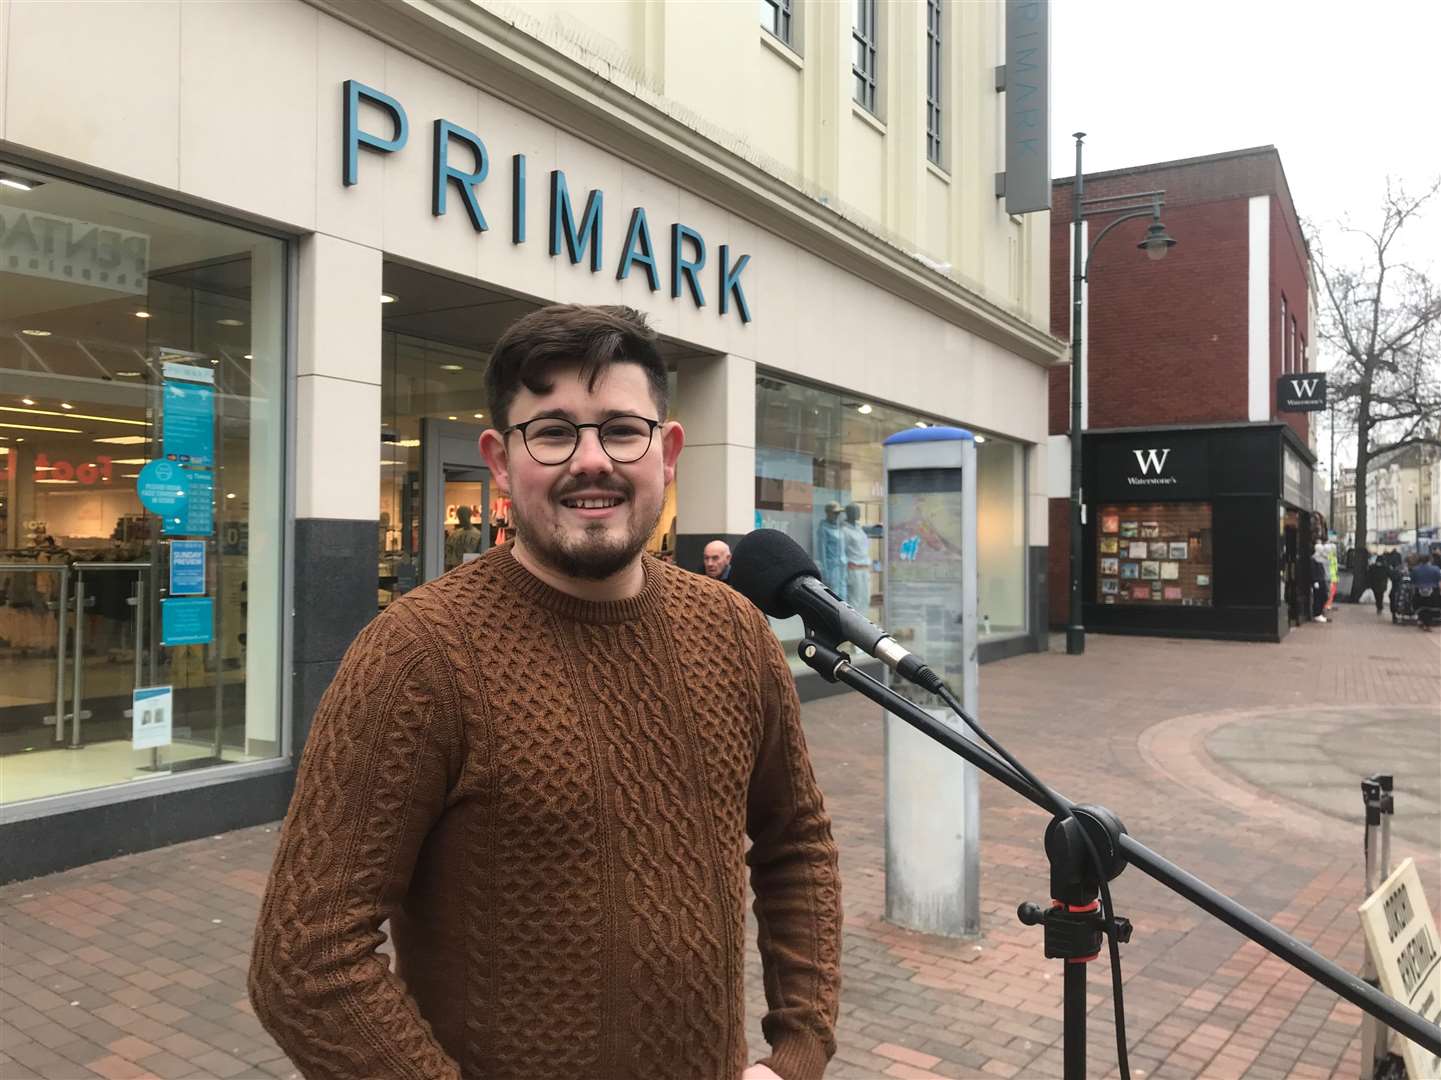 Busker Jordan Ravenhill likes to put a smile on faces in Chatham High Street